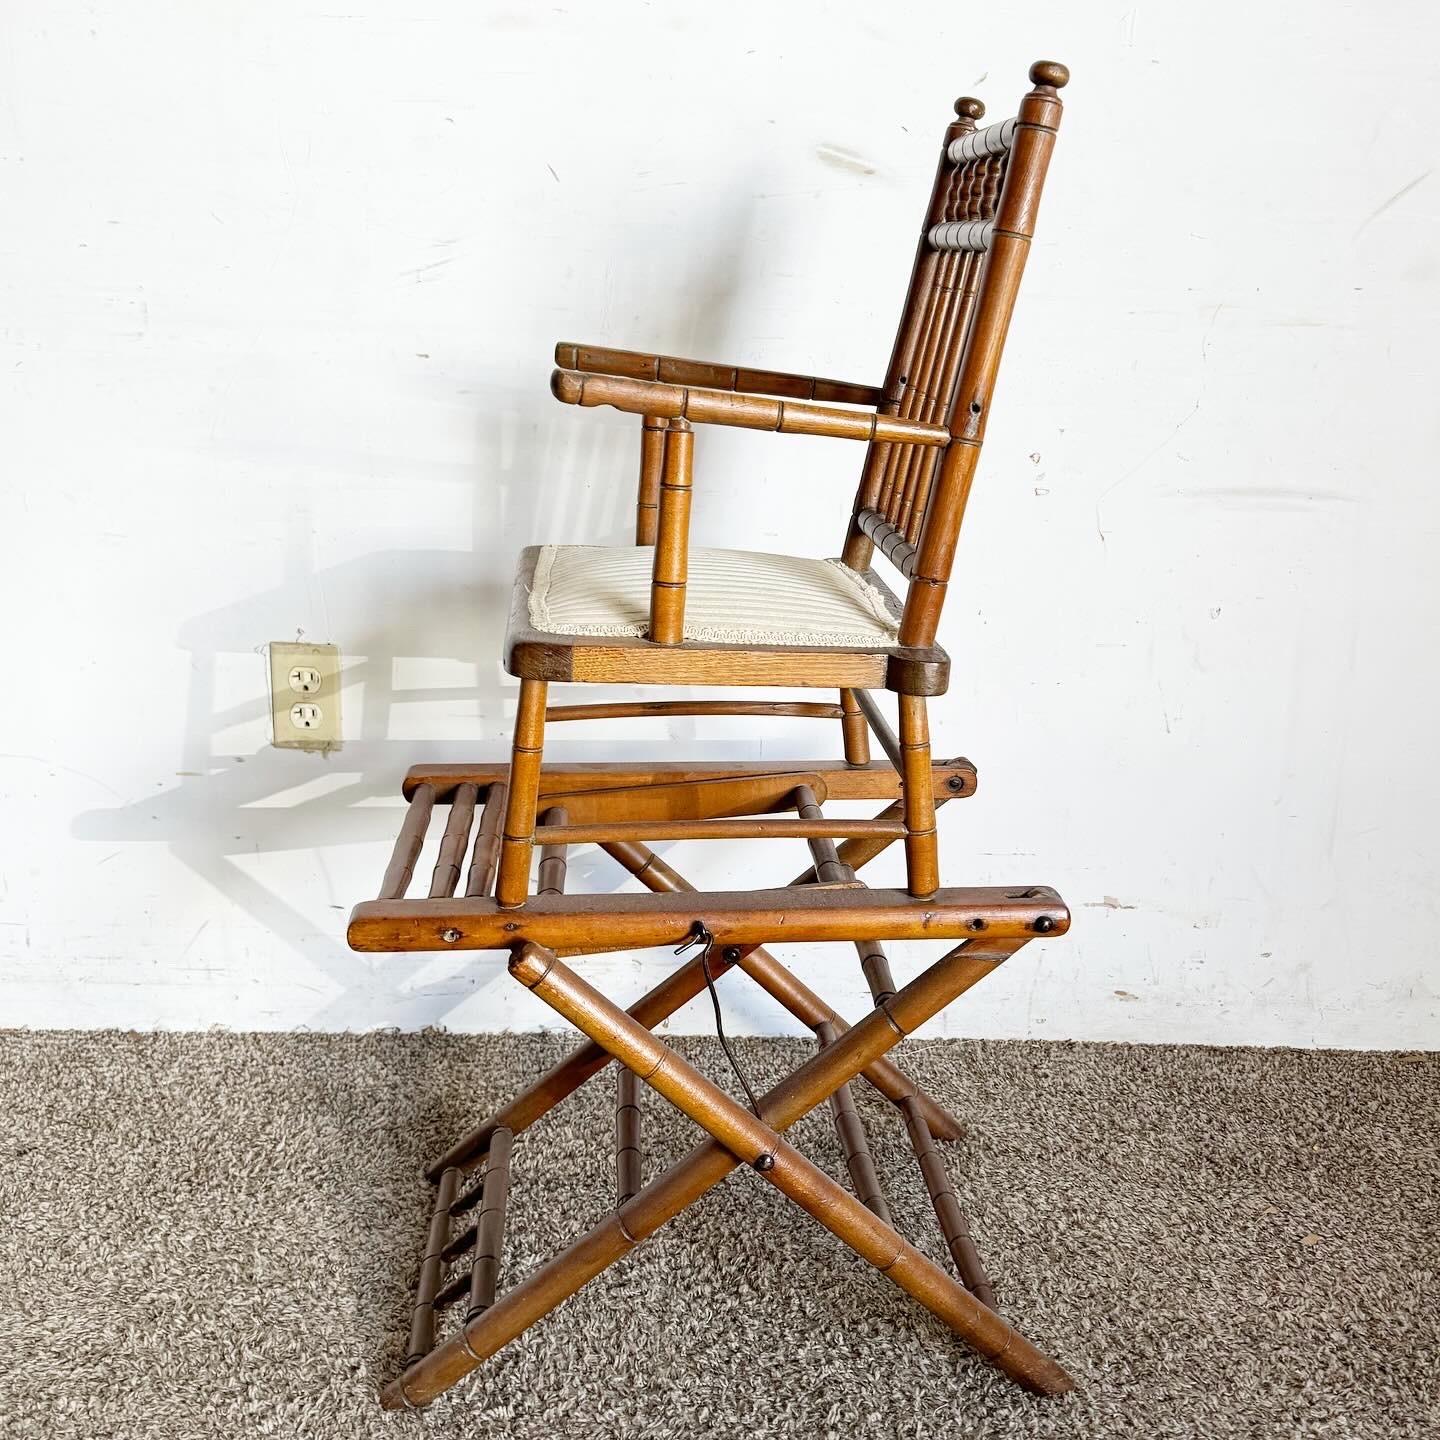 American Antique Wooden Folding High Chair For Sale